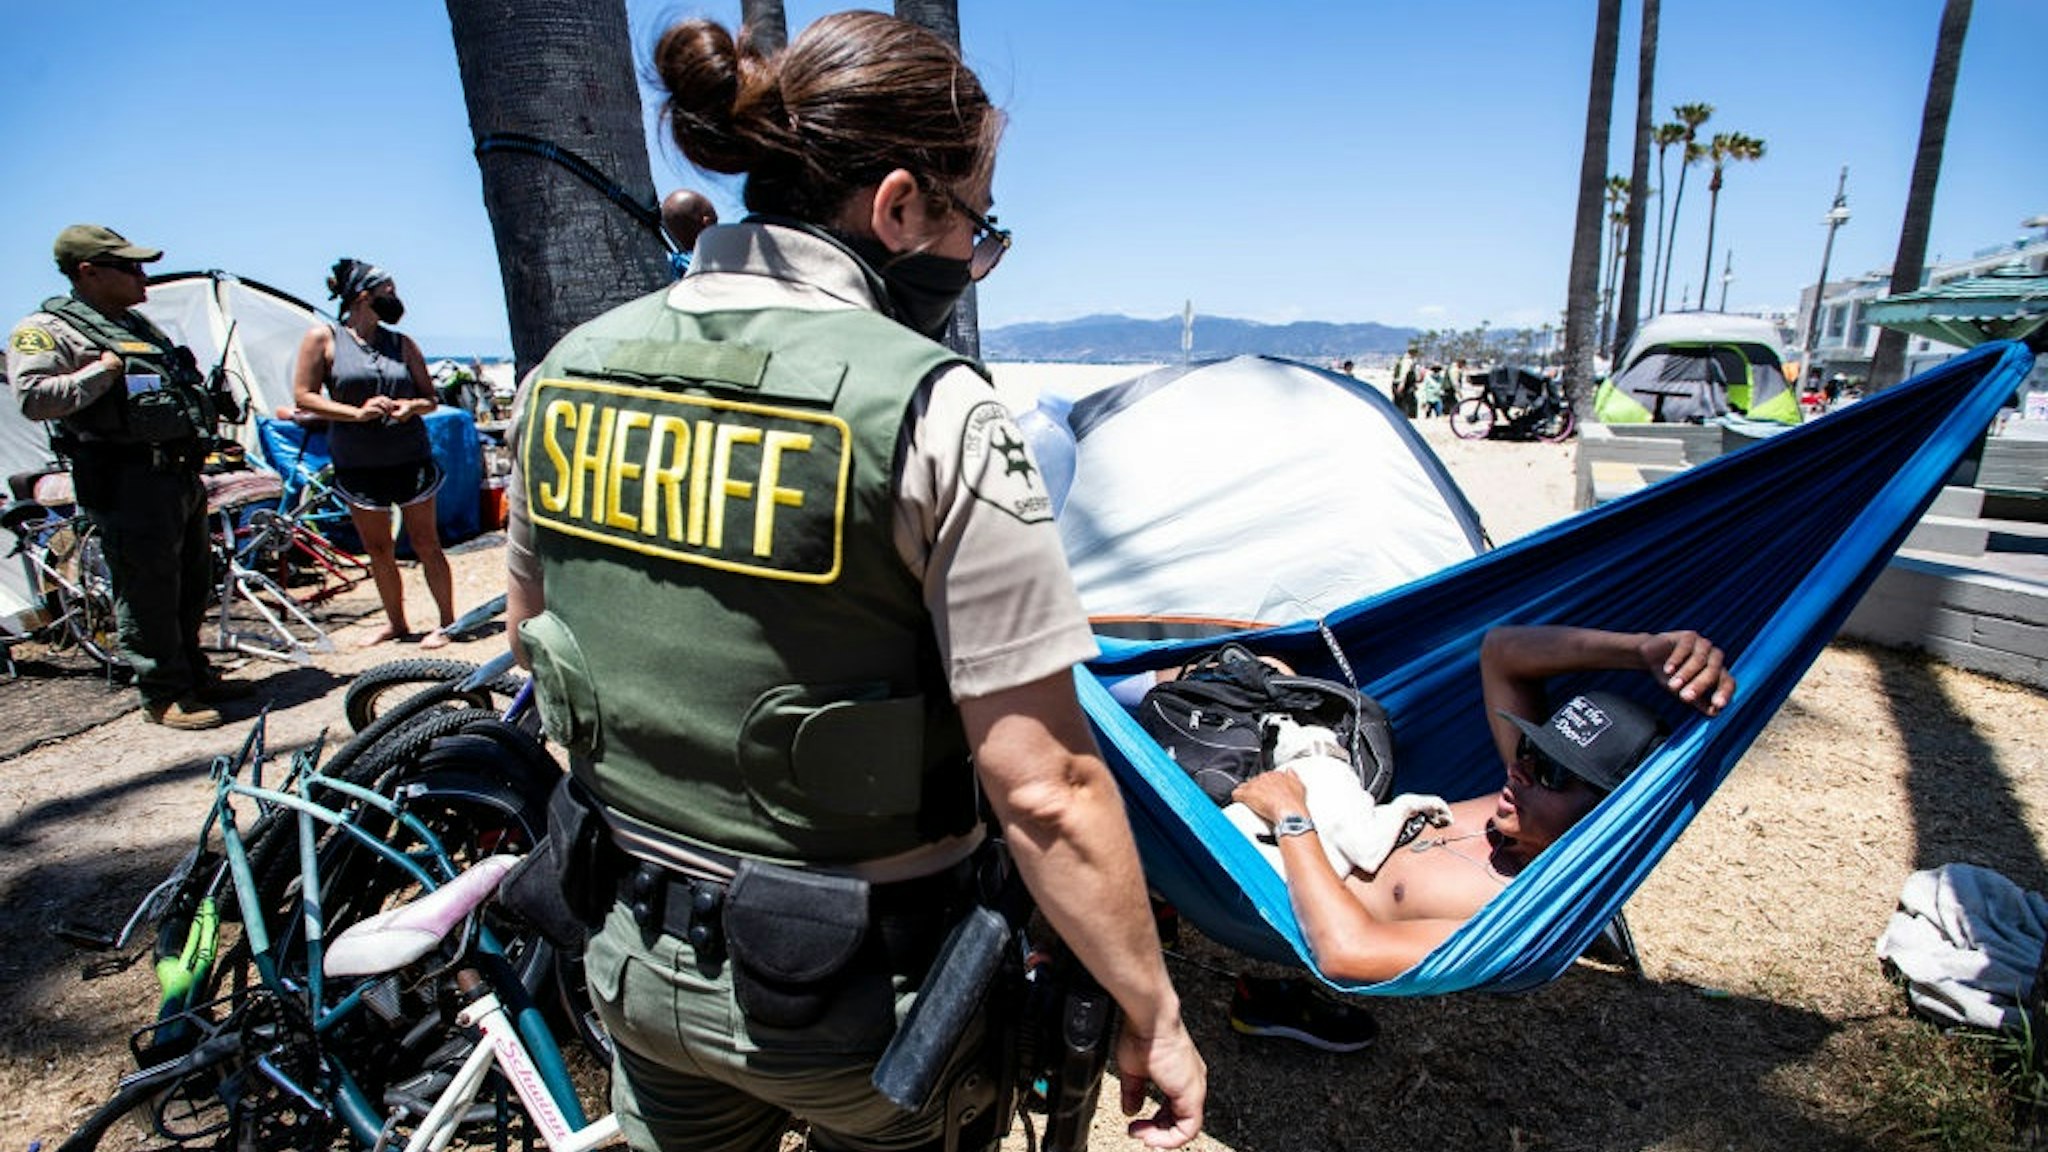 VENICE, CA - JUNE 08:Sheriff deputy Matson, of the Homeless Outreach Services Teams, encourages René Reyes, 28, on Tuesday, June 8, 2021 to leave the homeless encampment along the Venice Boardwalk where he has been living for the past three months after a divorce.